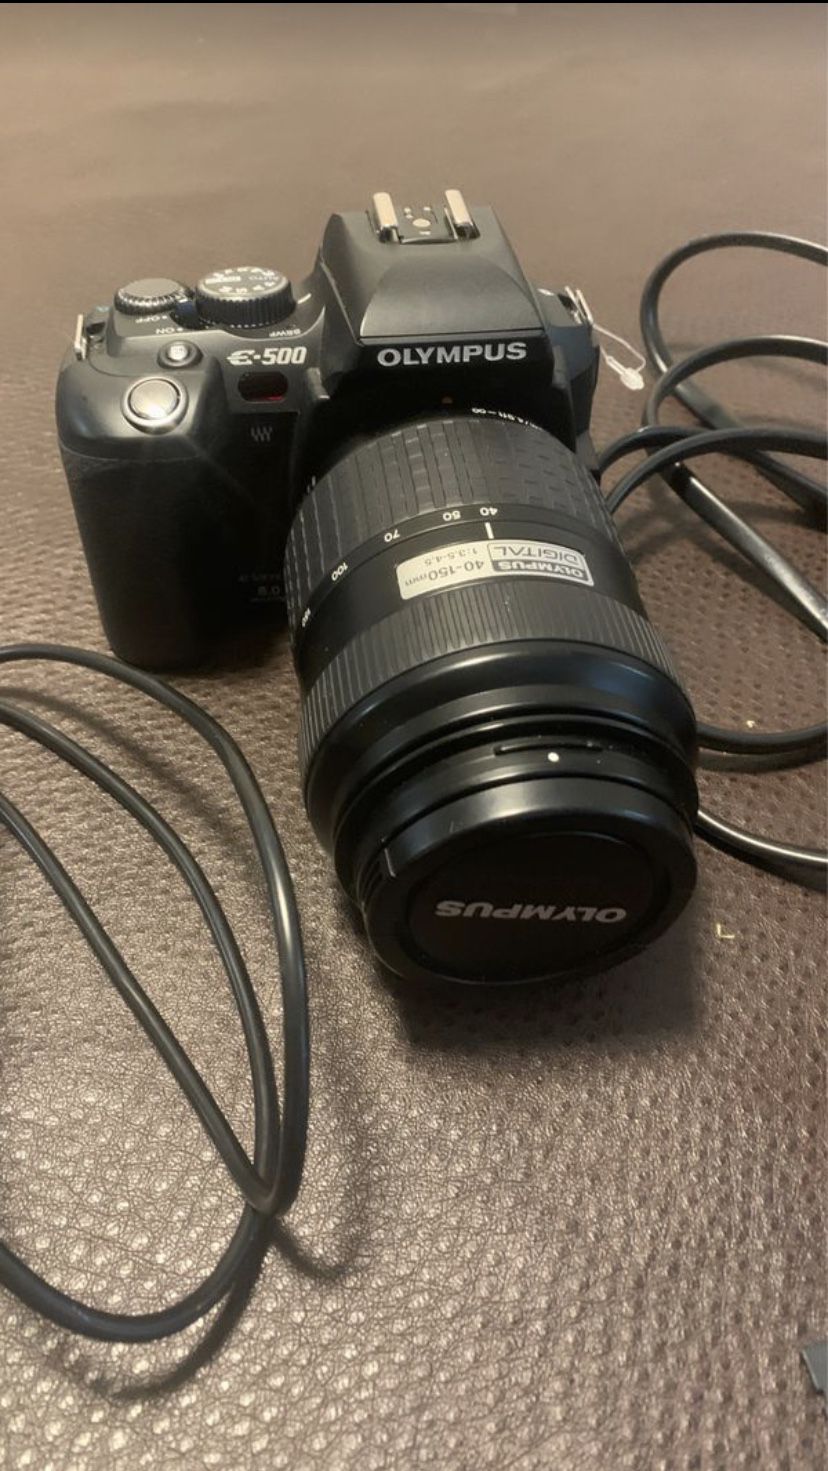 Olympus e 500 camera with battery charger, usb connector and a 1GB XD card